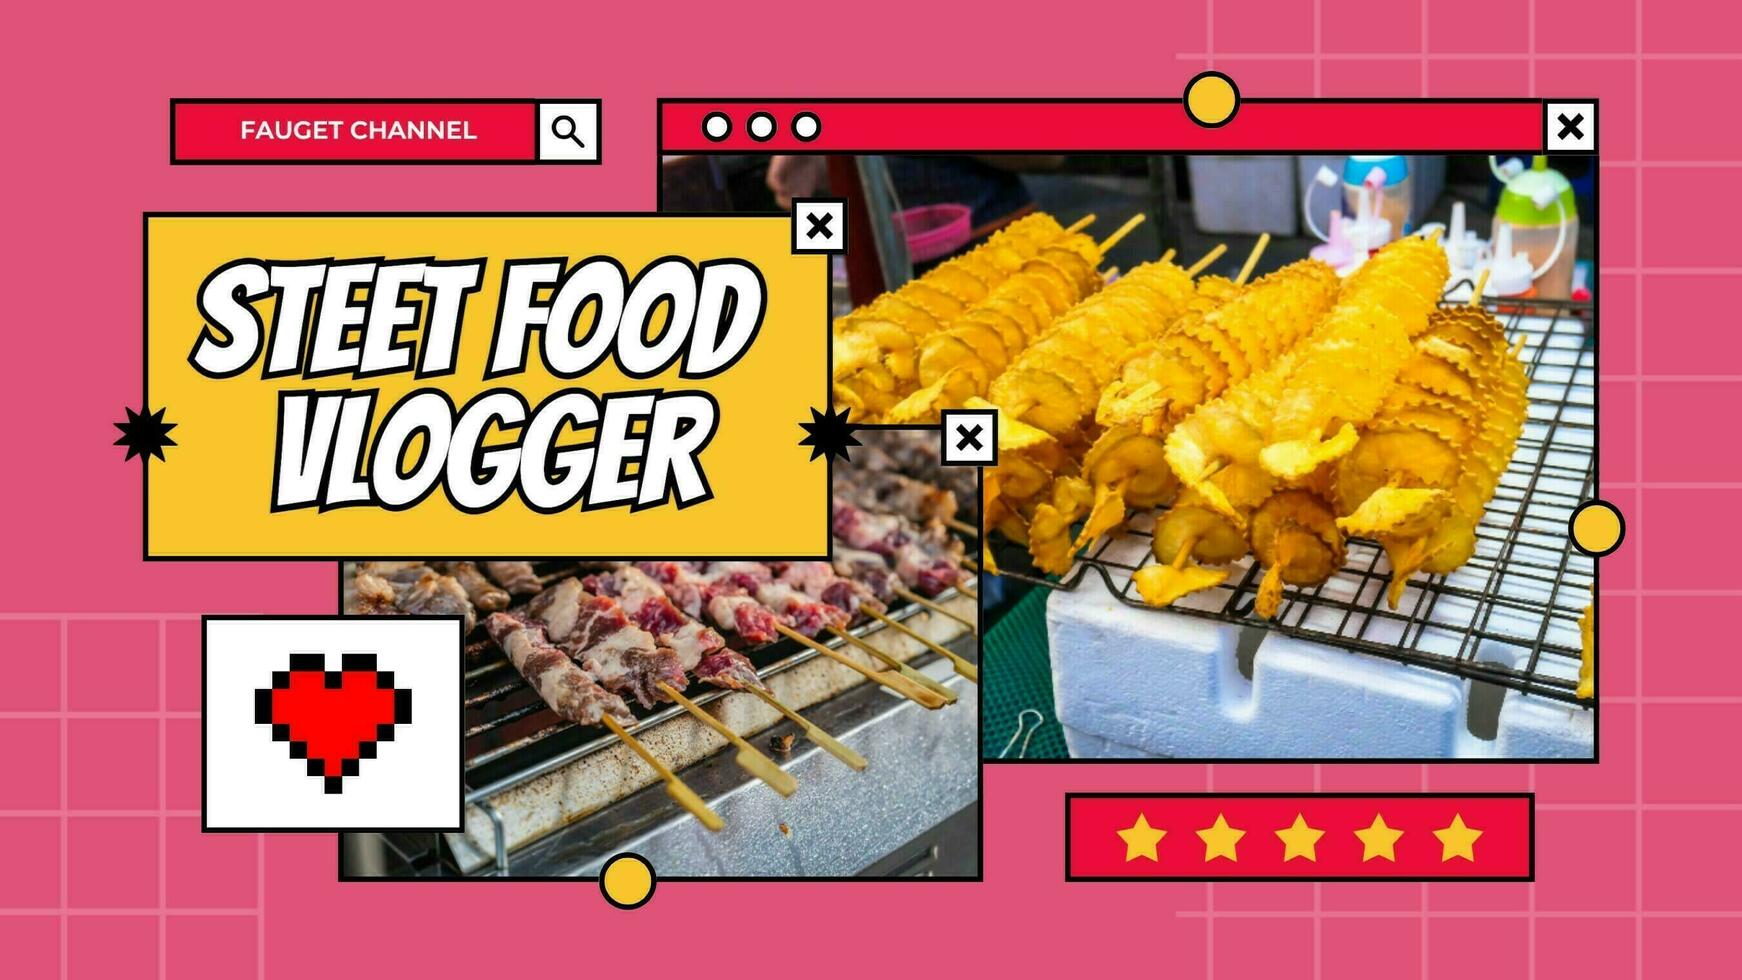 Red yellow retro street food youtube thumbnail template